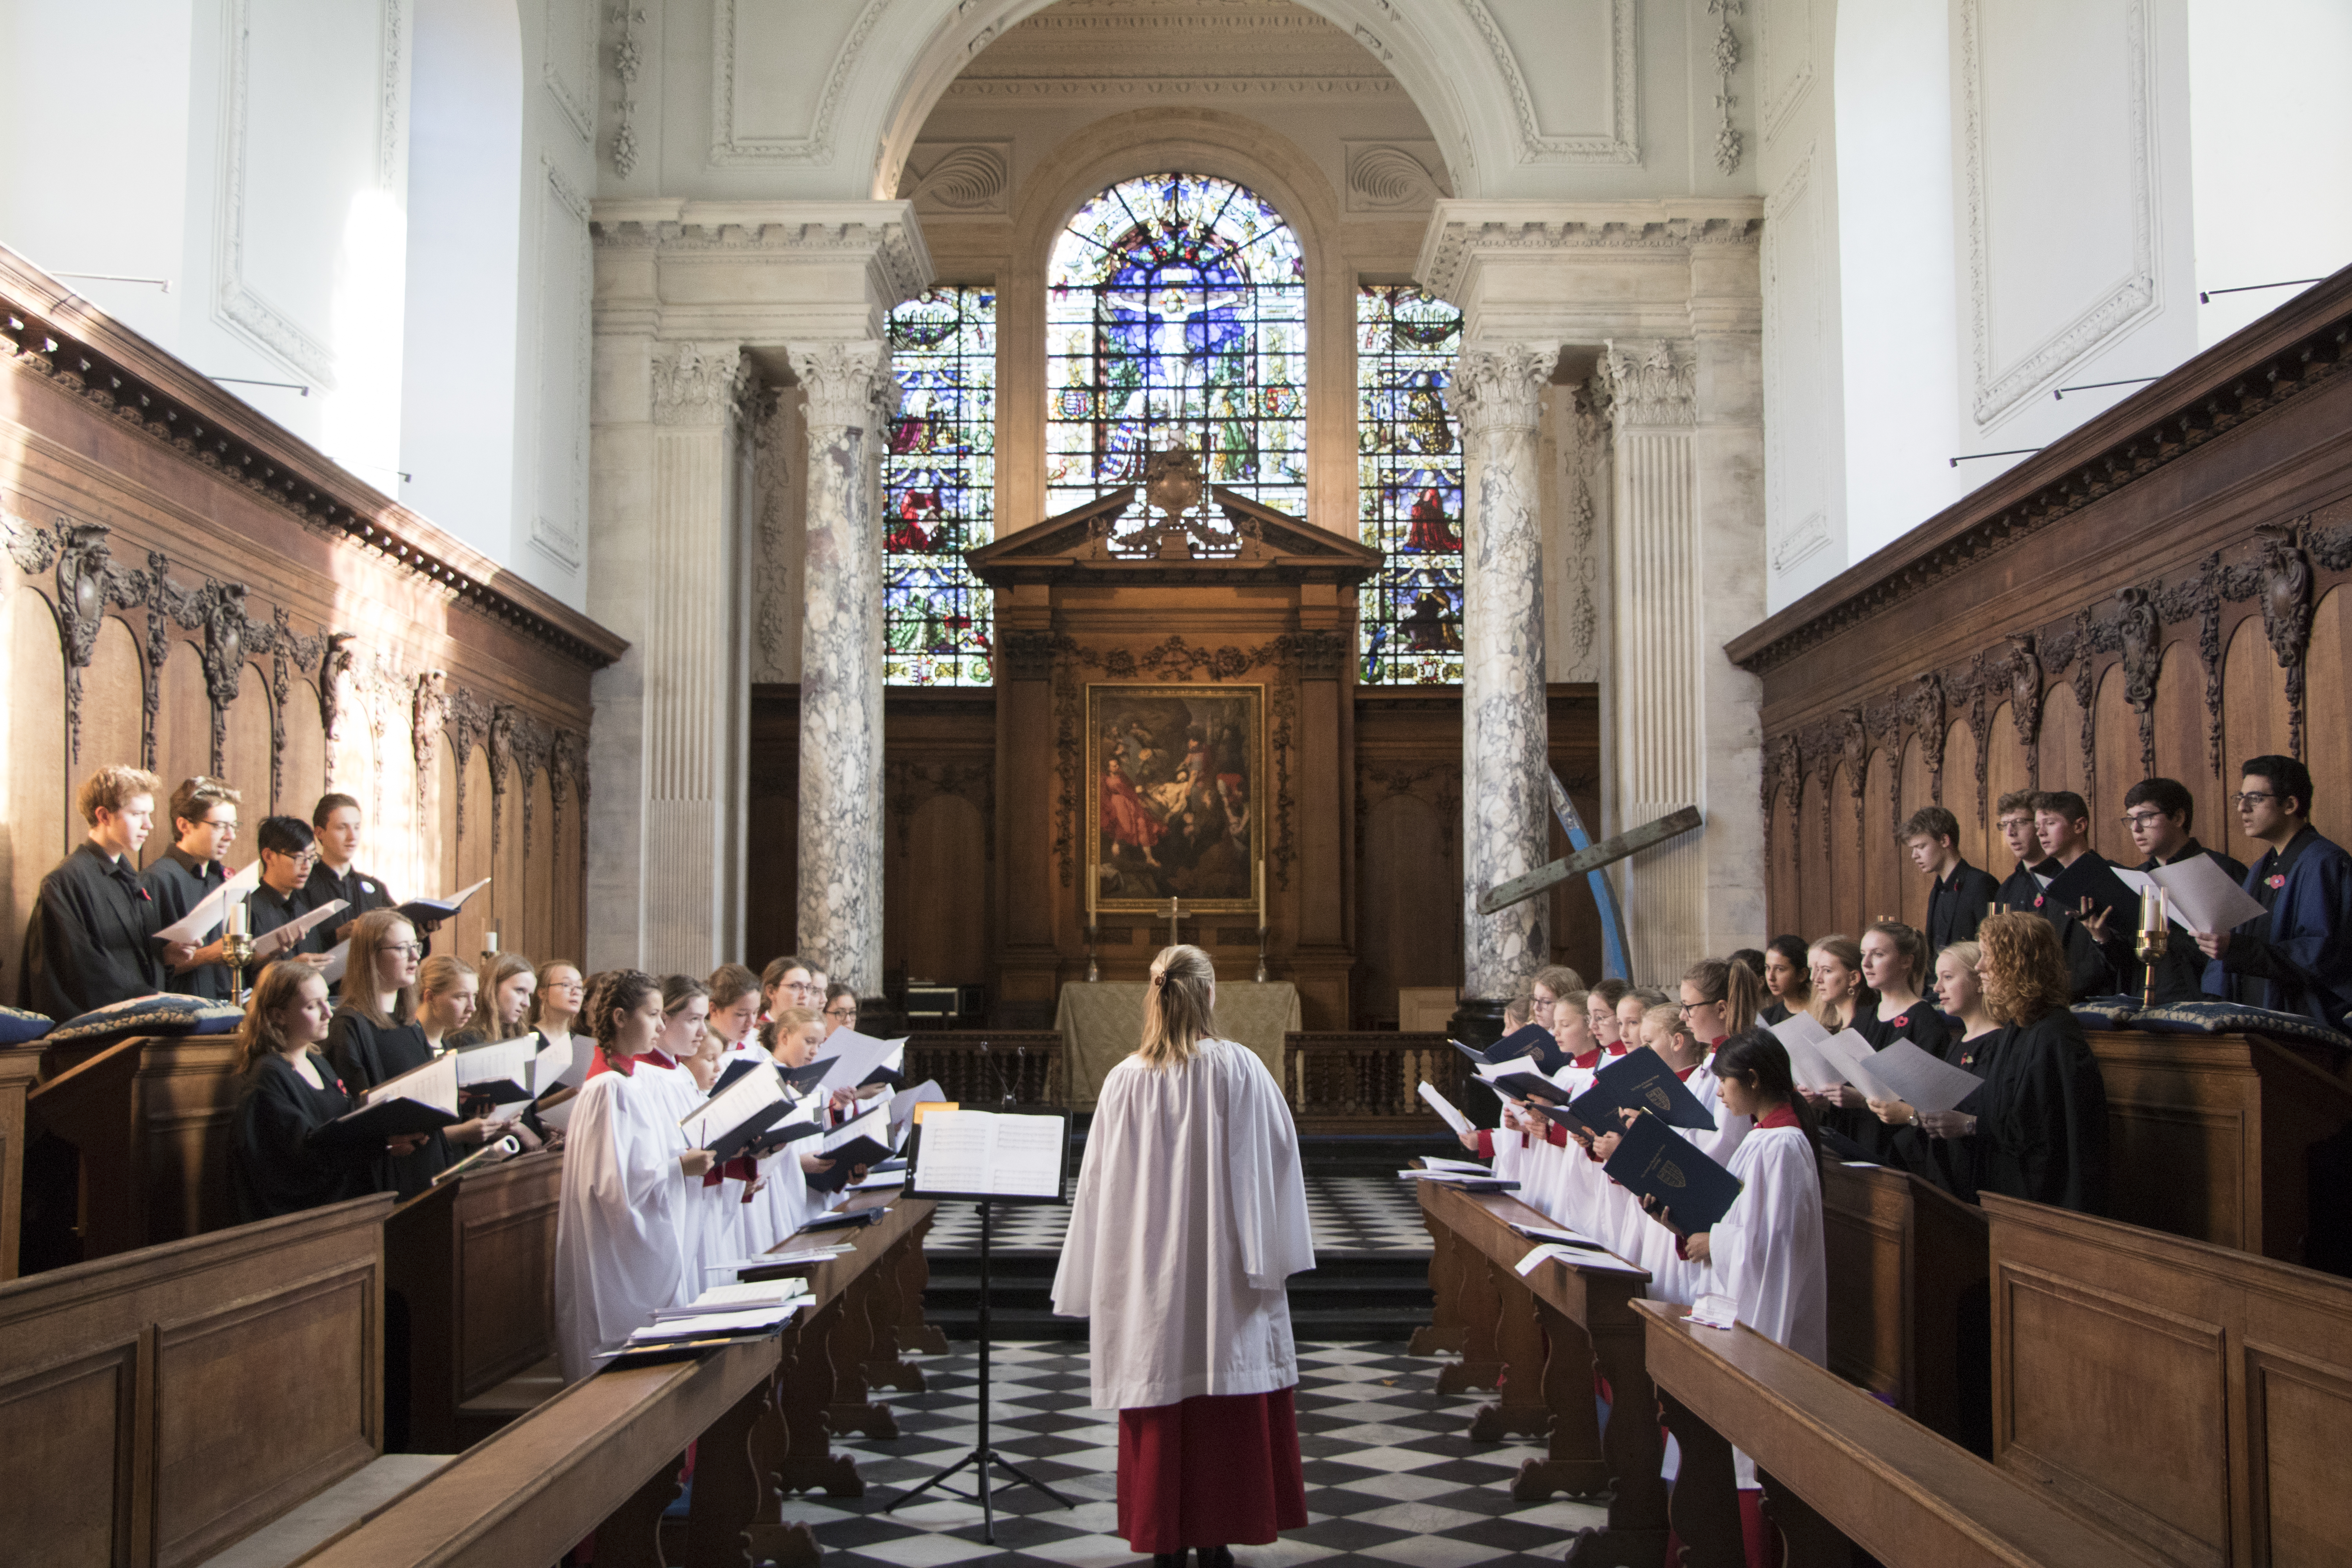 Combined Choirs of Pembroke College Cambridge, conducted by Anna Lapwood